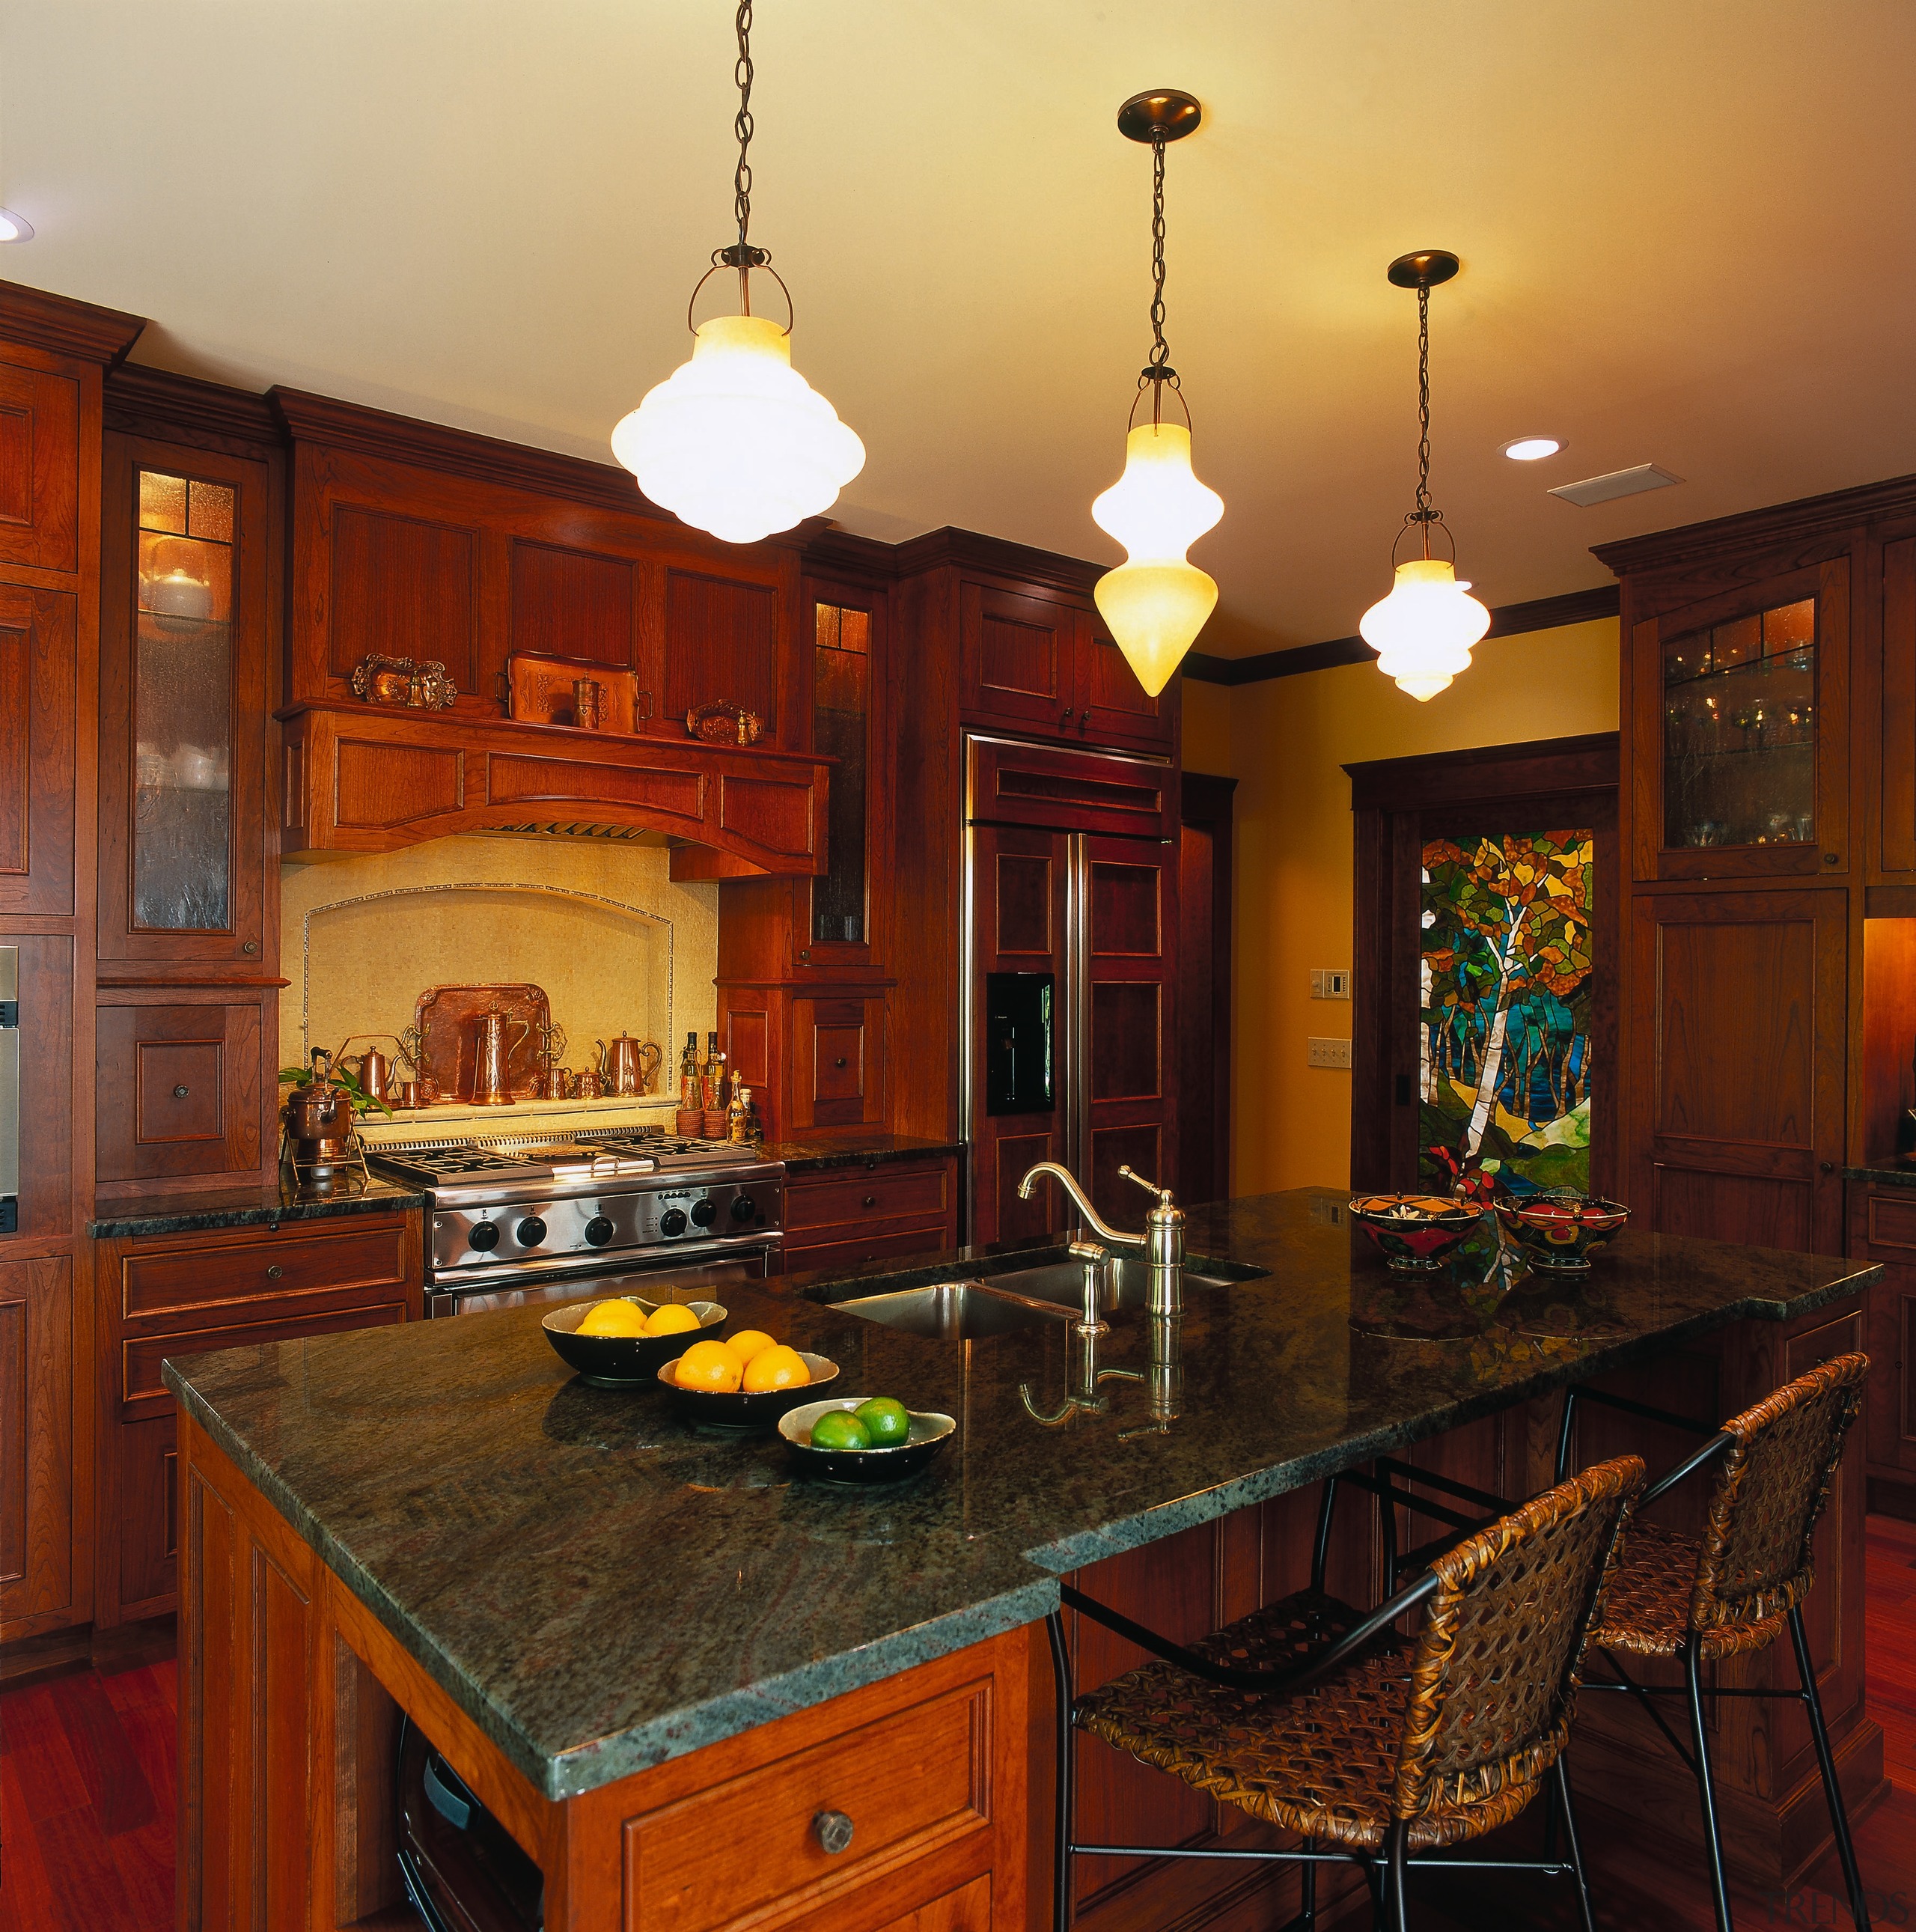 Inner view of the kitchen area of this cabinetry, countertop, dining room, home, interior design, kitchen, room, red